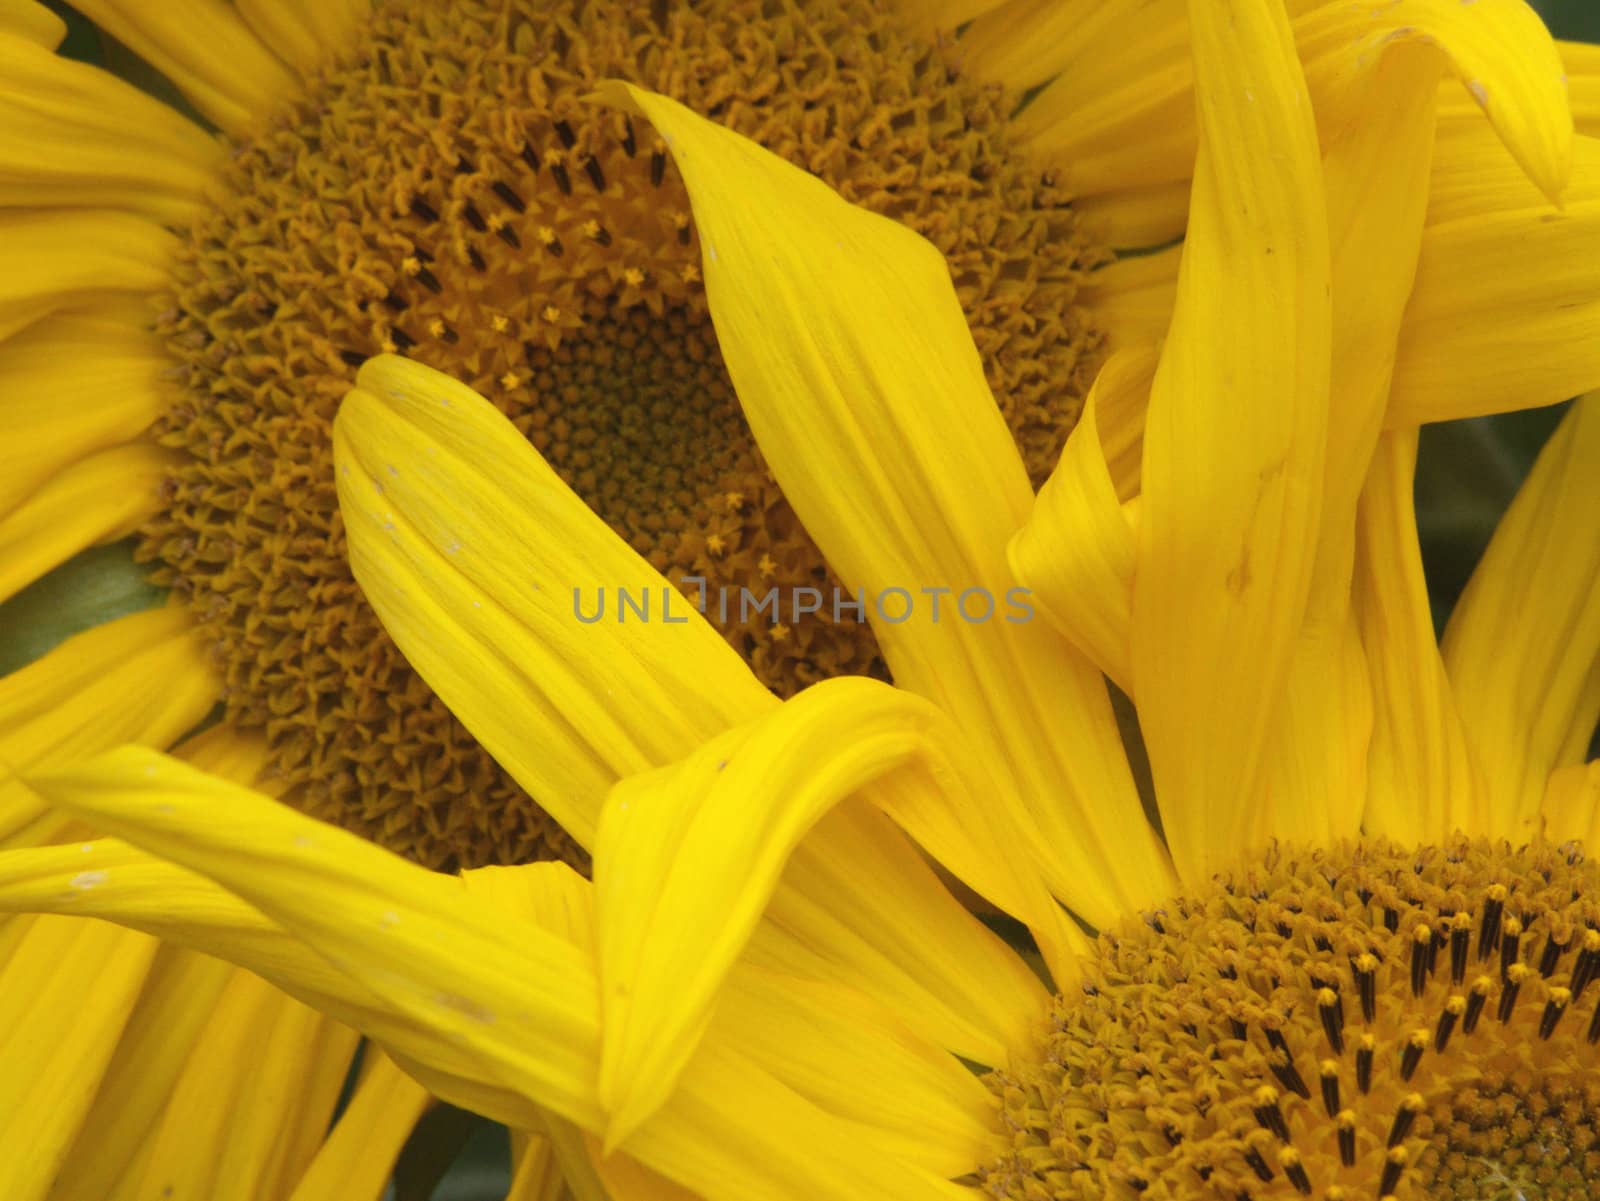 The image of two yellow inflorescences of sunflowers